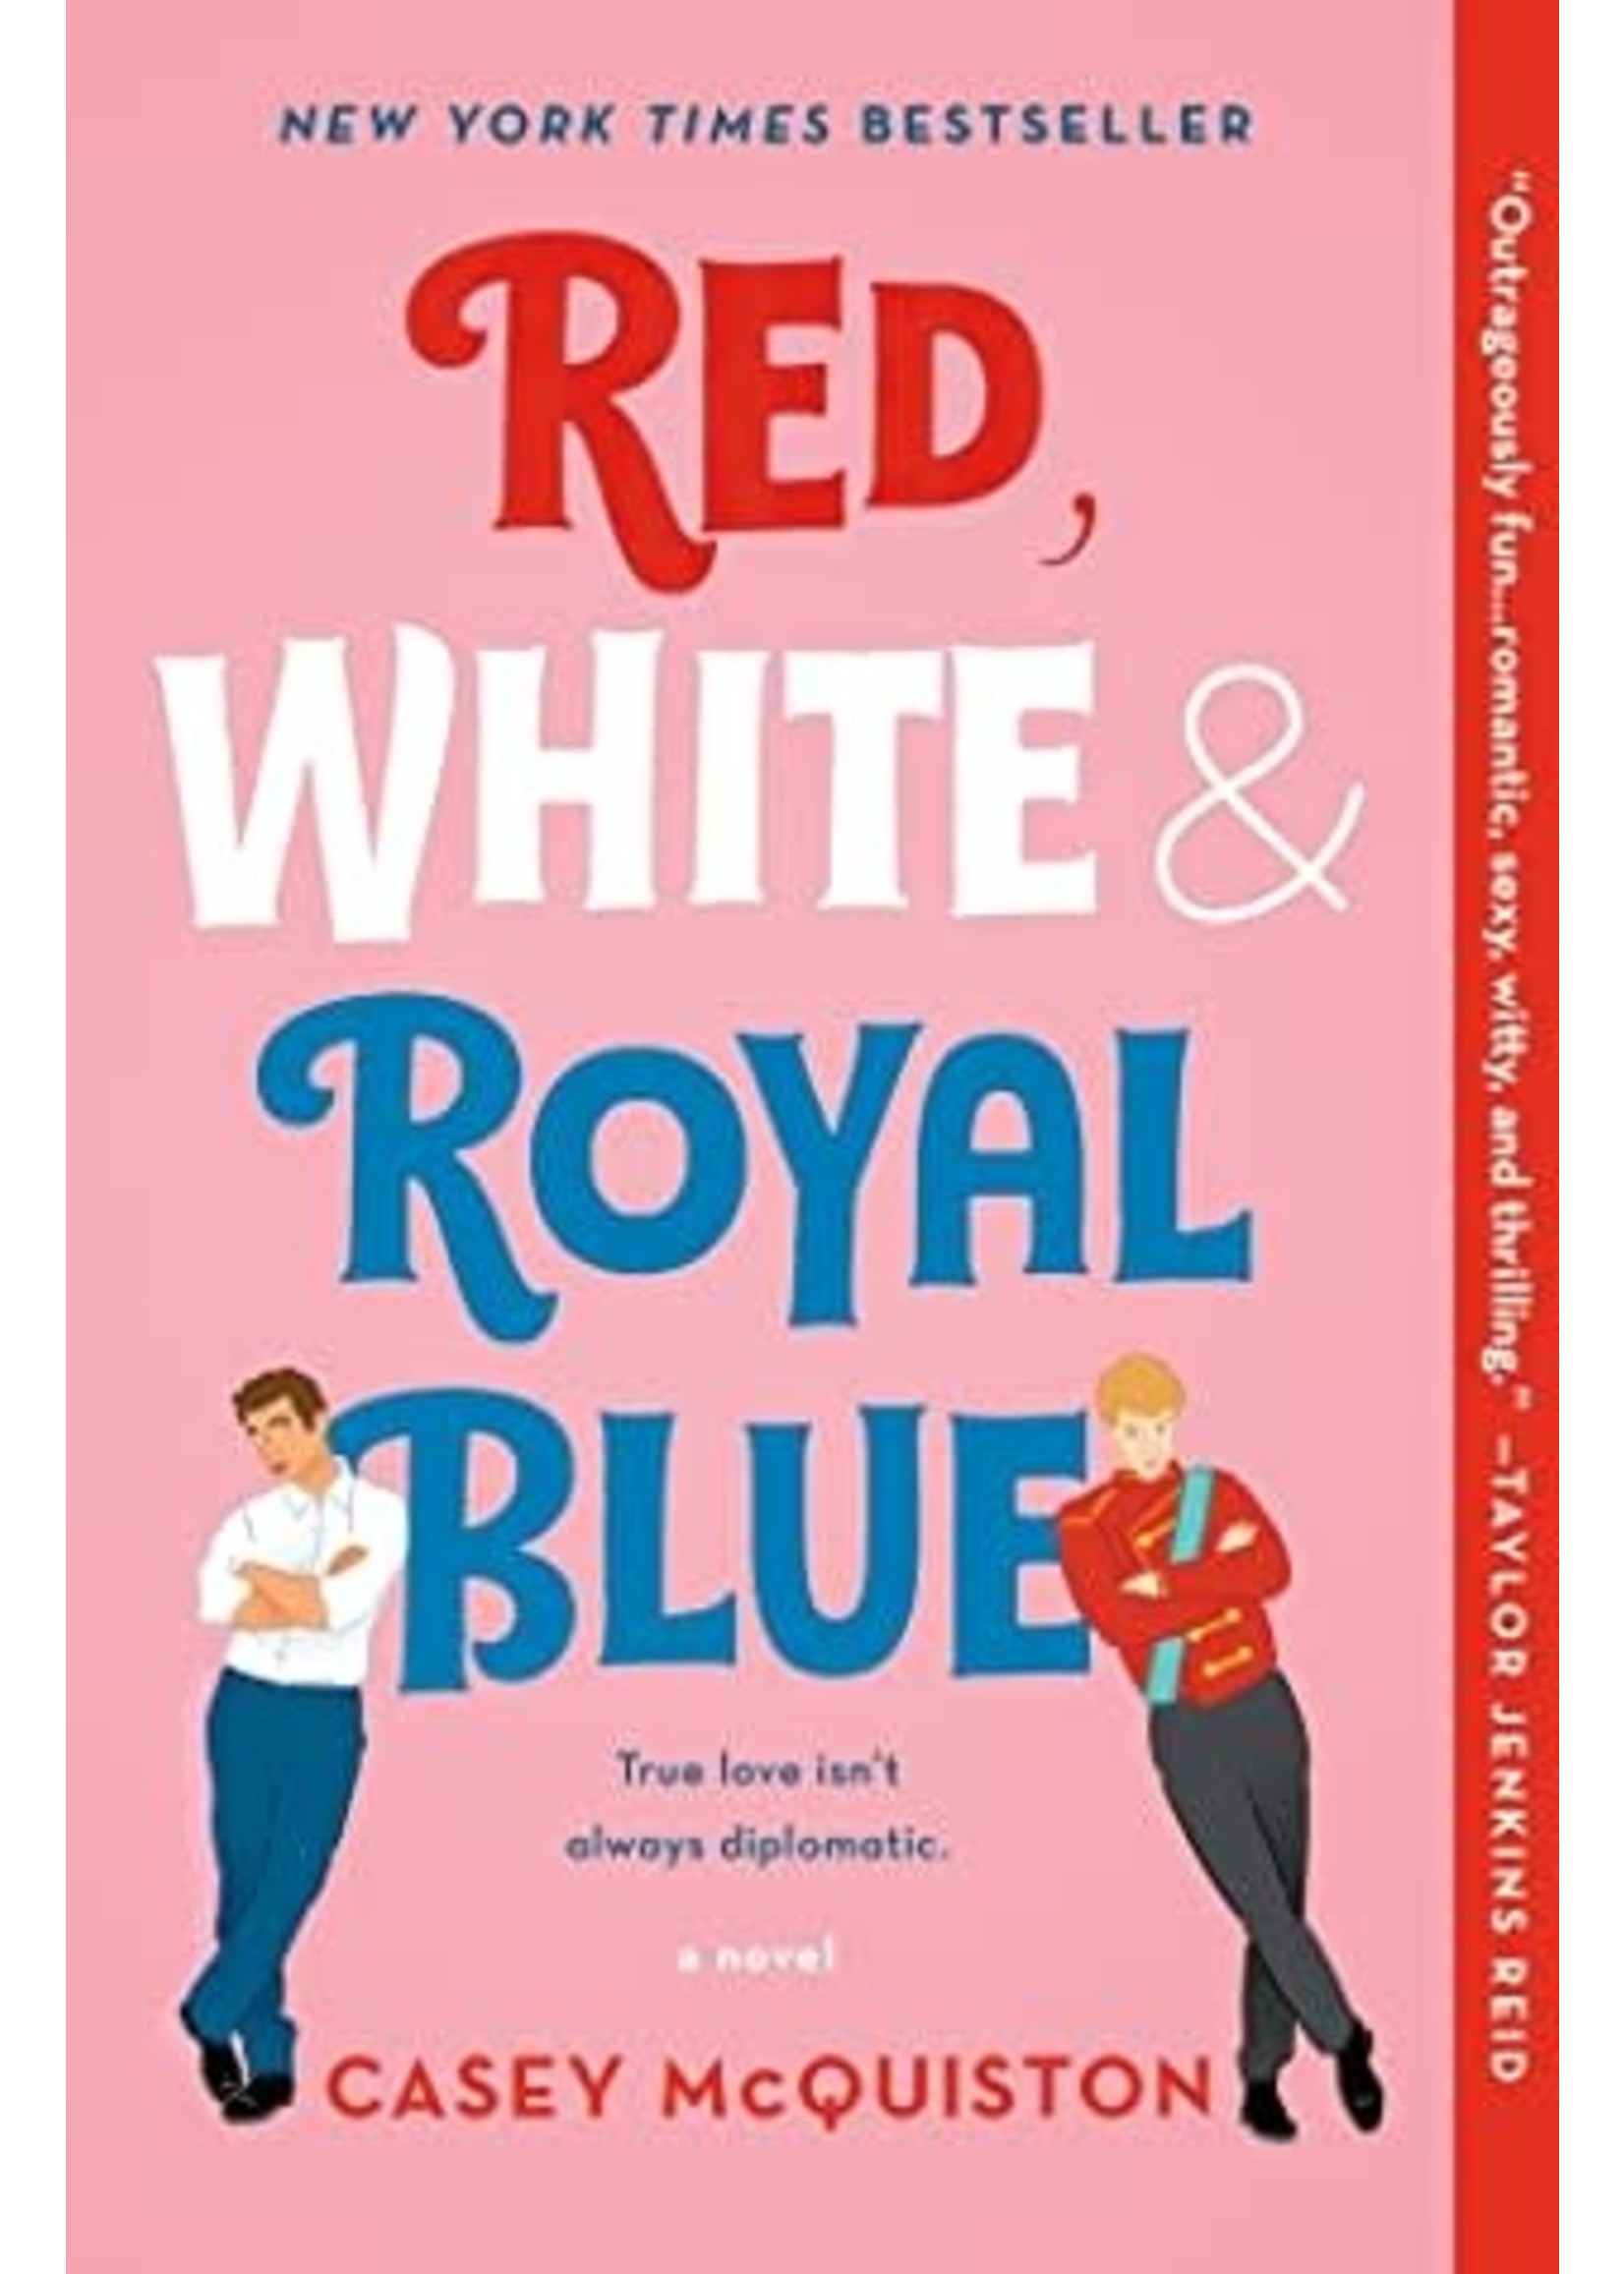 Red, White & Royal Blue by Casey McQuinston